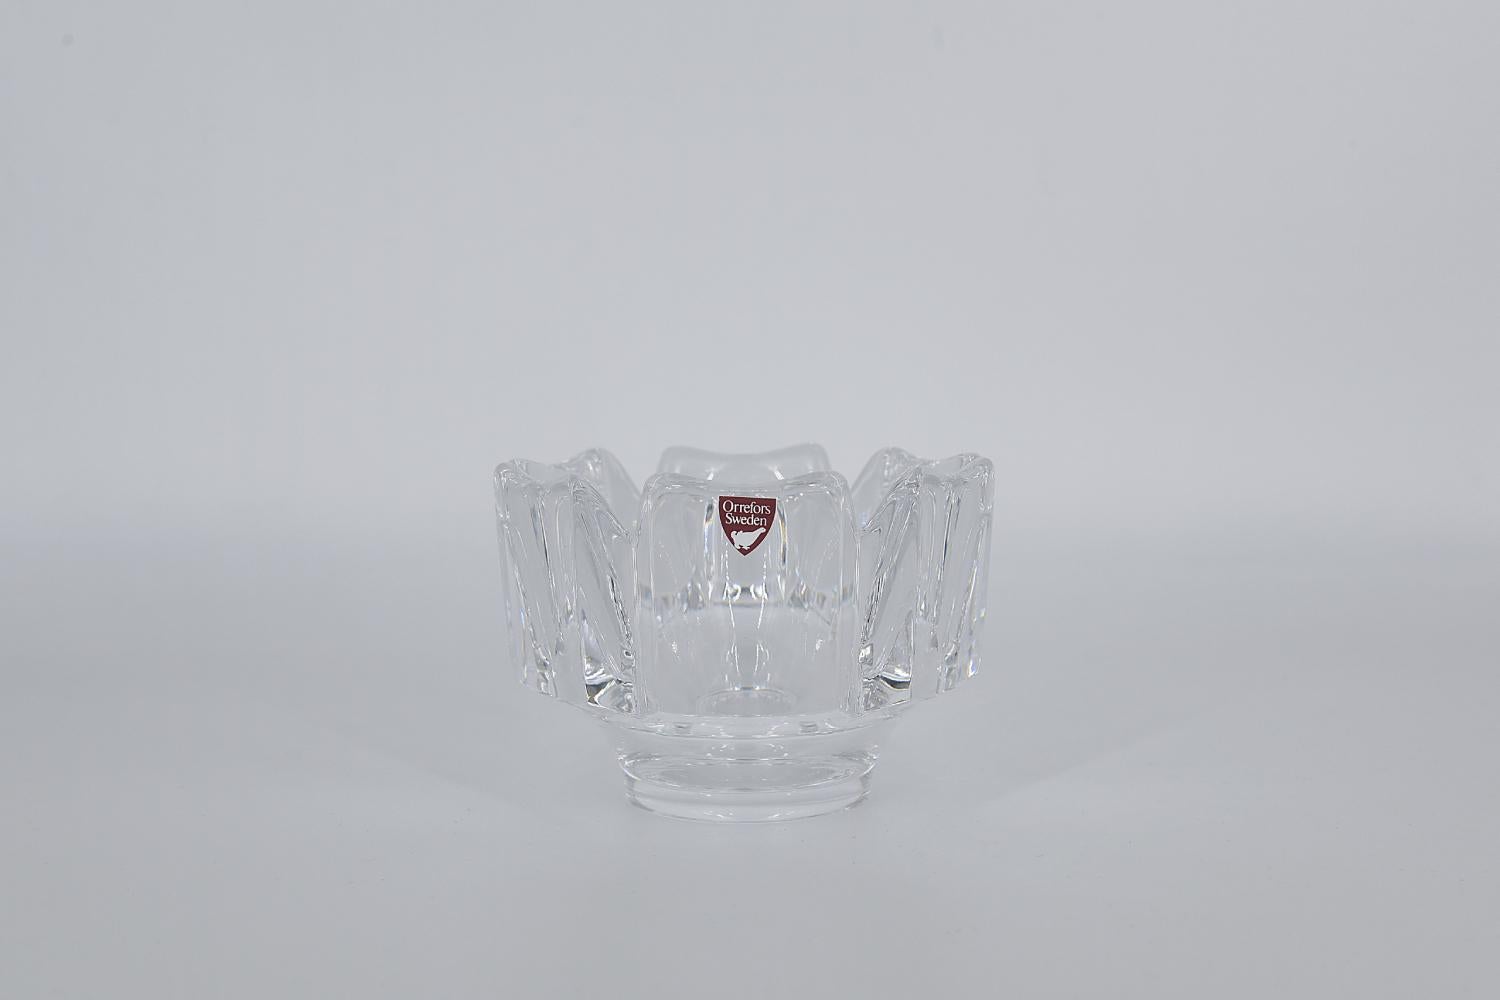 This crystal Corona Bowl was designed by Lars Hellsten for the Swedish glassworks Orrefors in the 1970s. Made of high-quality artistic crystal in the shape of a hexagonal crown placed on a round base.

Lars Hellsten studied sculpture and ceramics